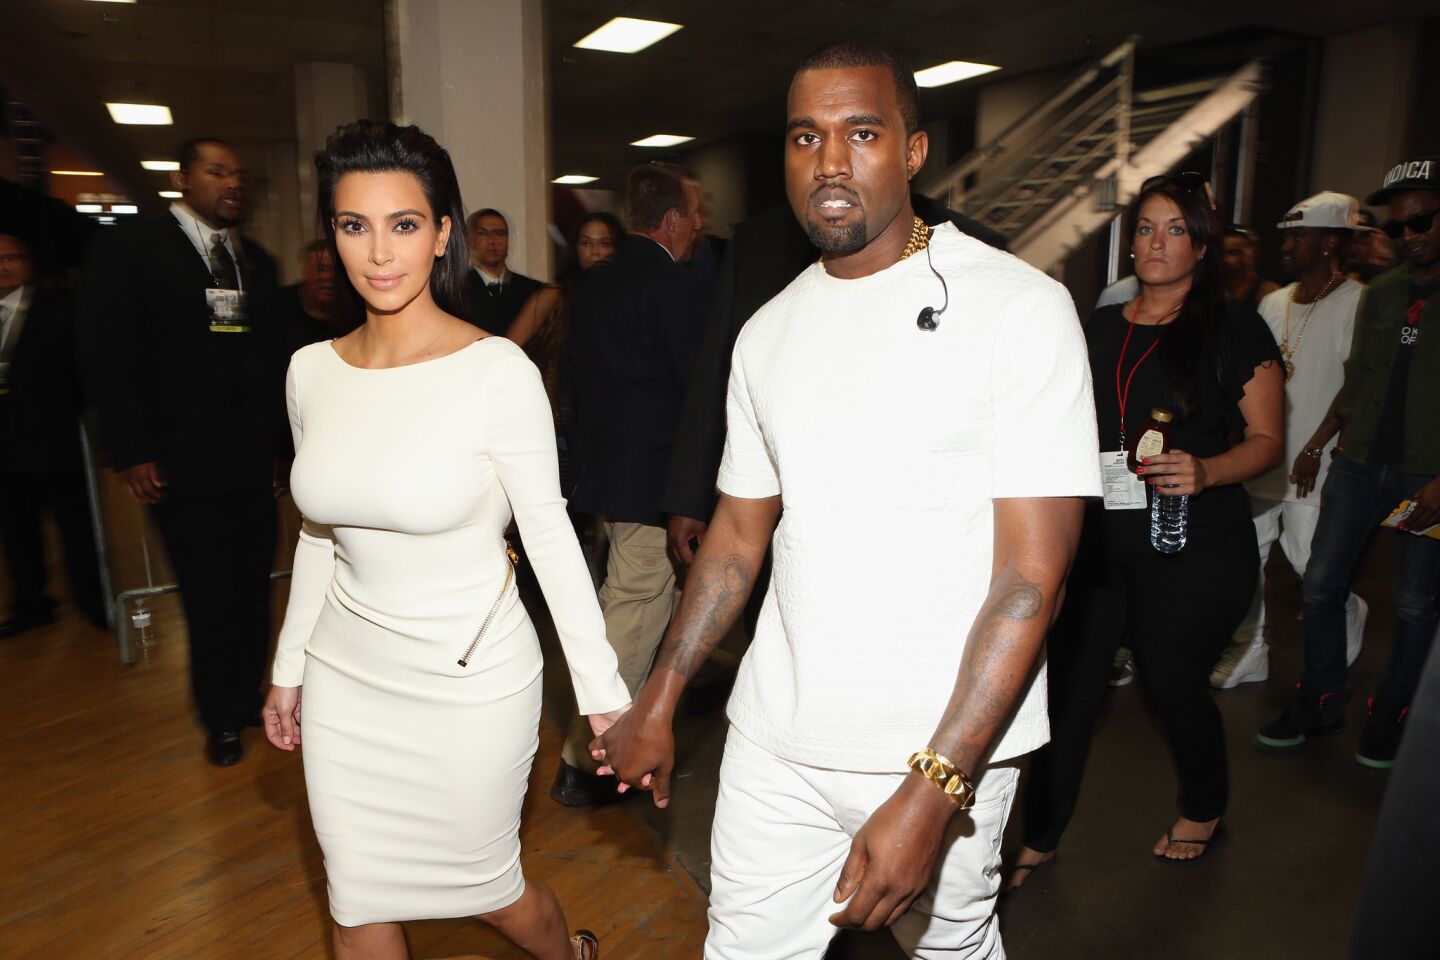 Kanye West and Kim Kardashian at the 2012 BET Awards at the Shrine Auditorium in Los Angeles.